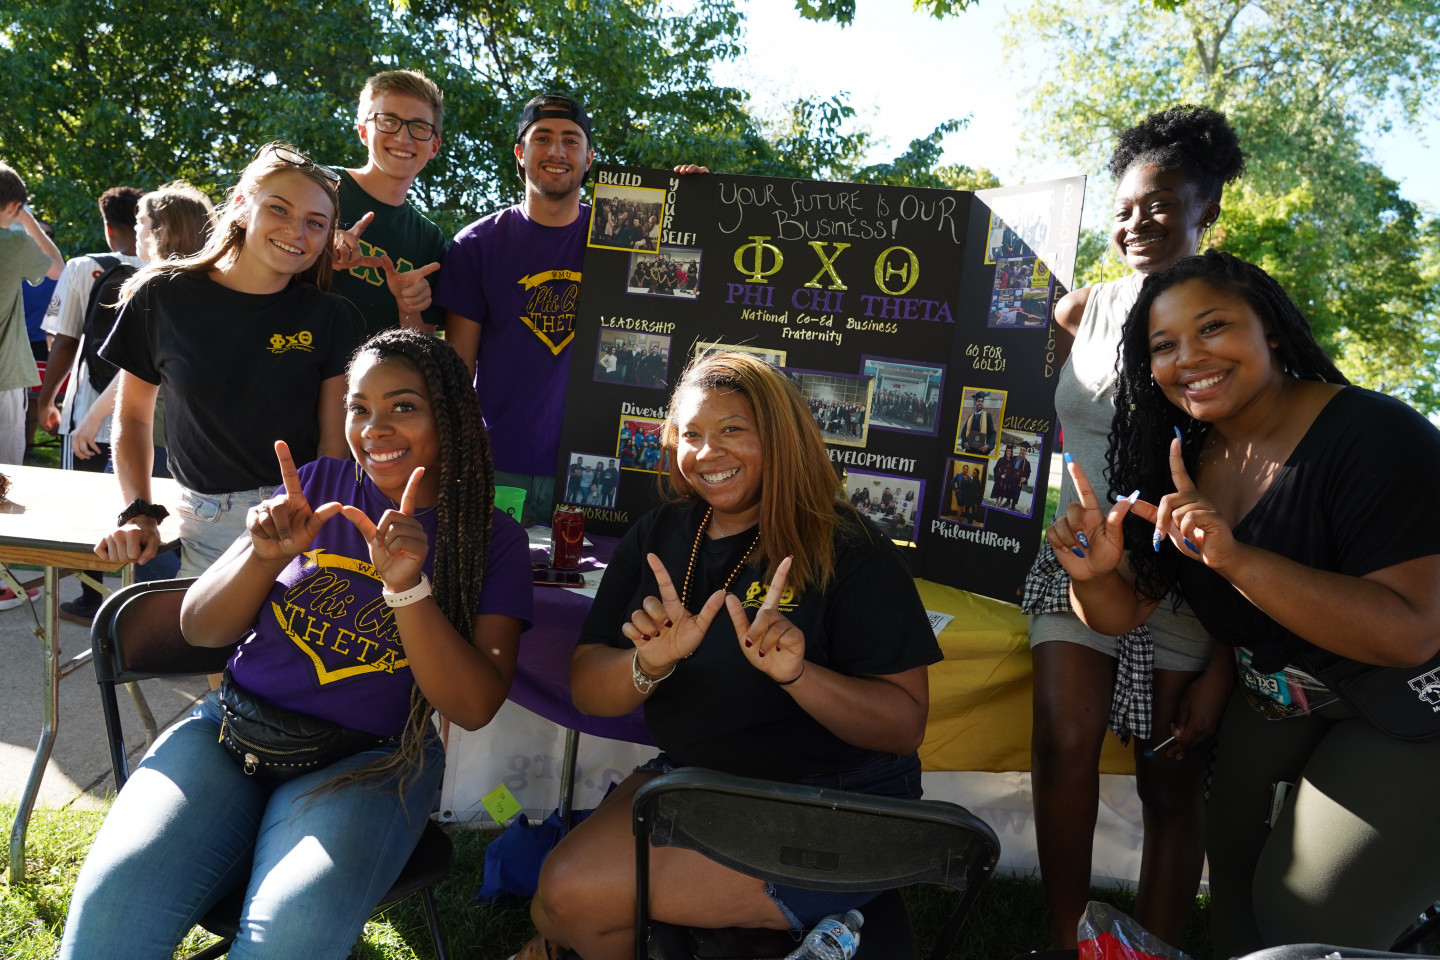 Members of a co-ed business fraternity pose together.